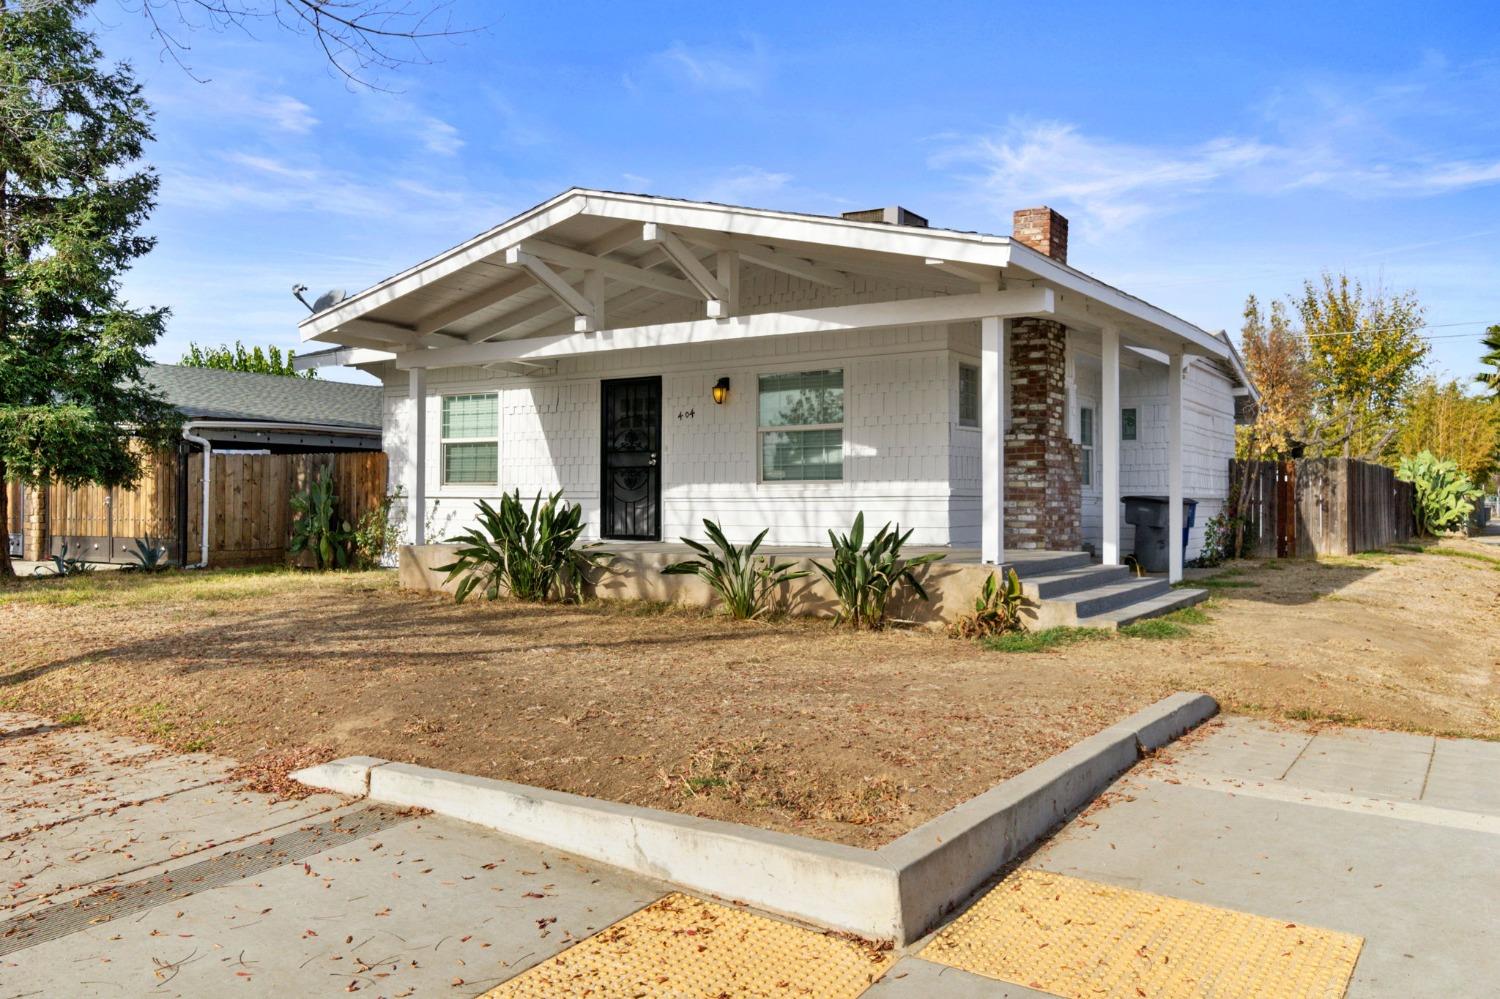 Photo of 404 W Birch Ave in Pinedale, CA